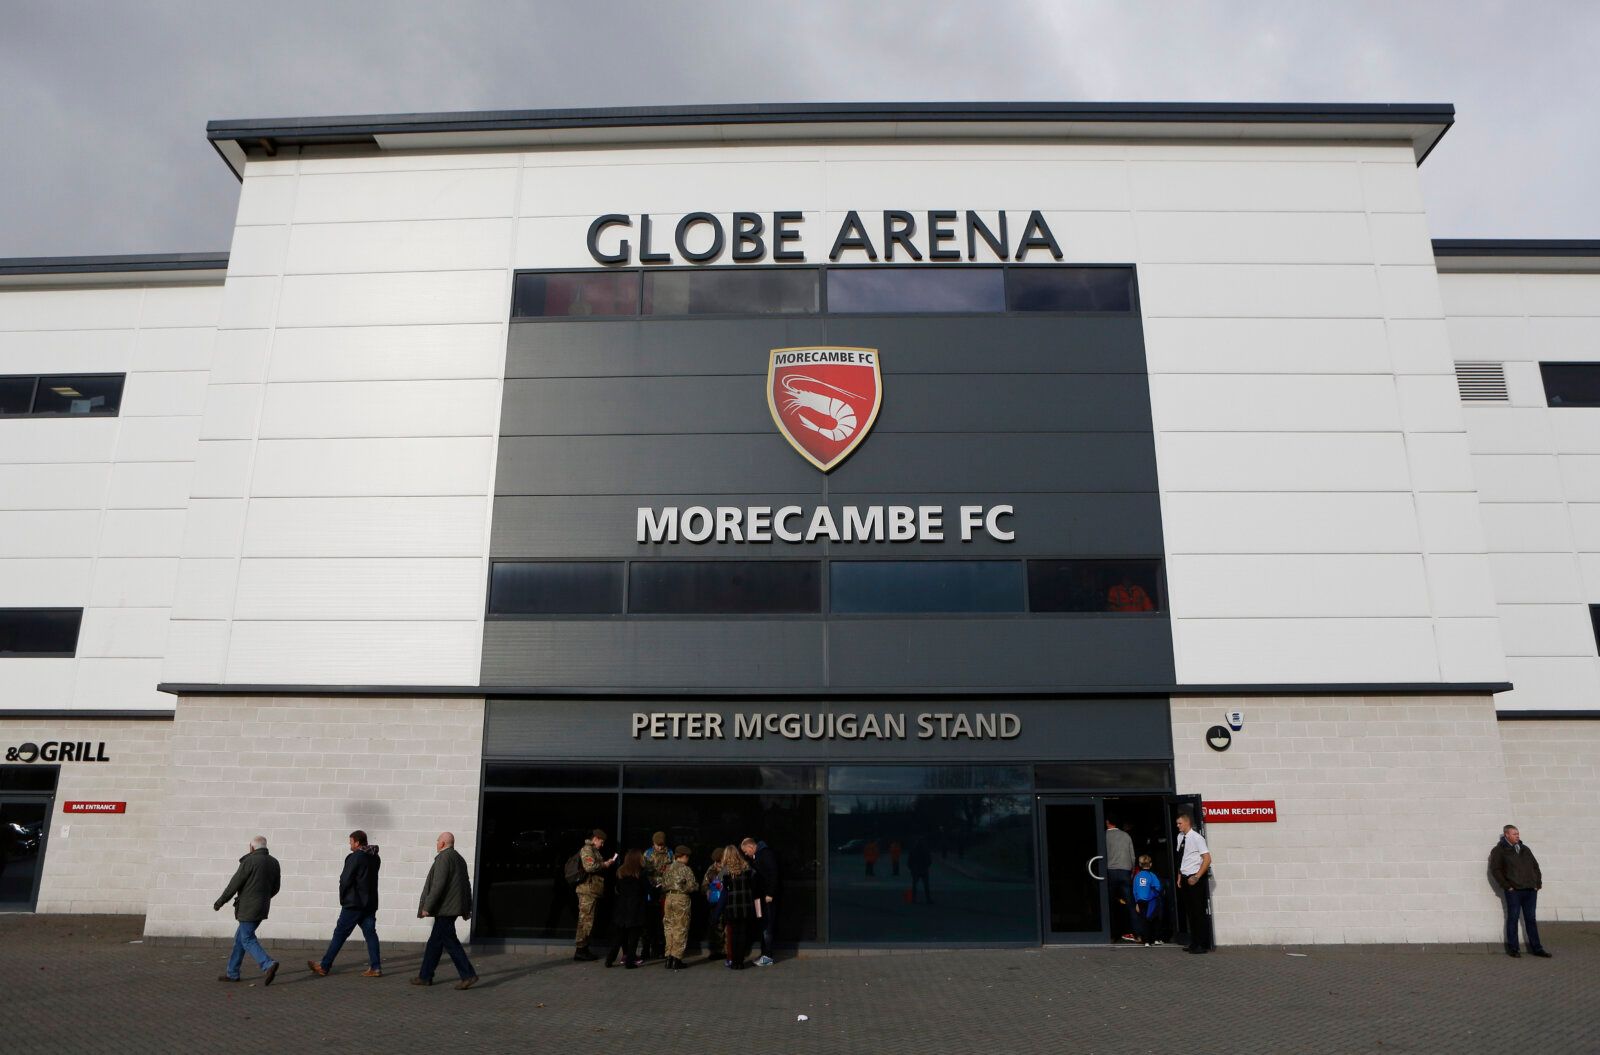 Britain Football Soccer - Morecambe v Coventry City - FA Cup First Round - Globe Arena - 16/17 - 6/11/16 General view outside the stadium before the match Mandatory Credit: Action Images / Craig Brough EDITORIAL USE ONLY. No use with unauthorized audio, video, data, fixture lists, club/league logos or 